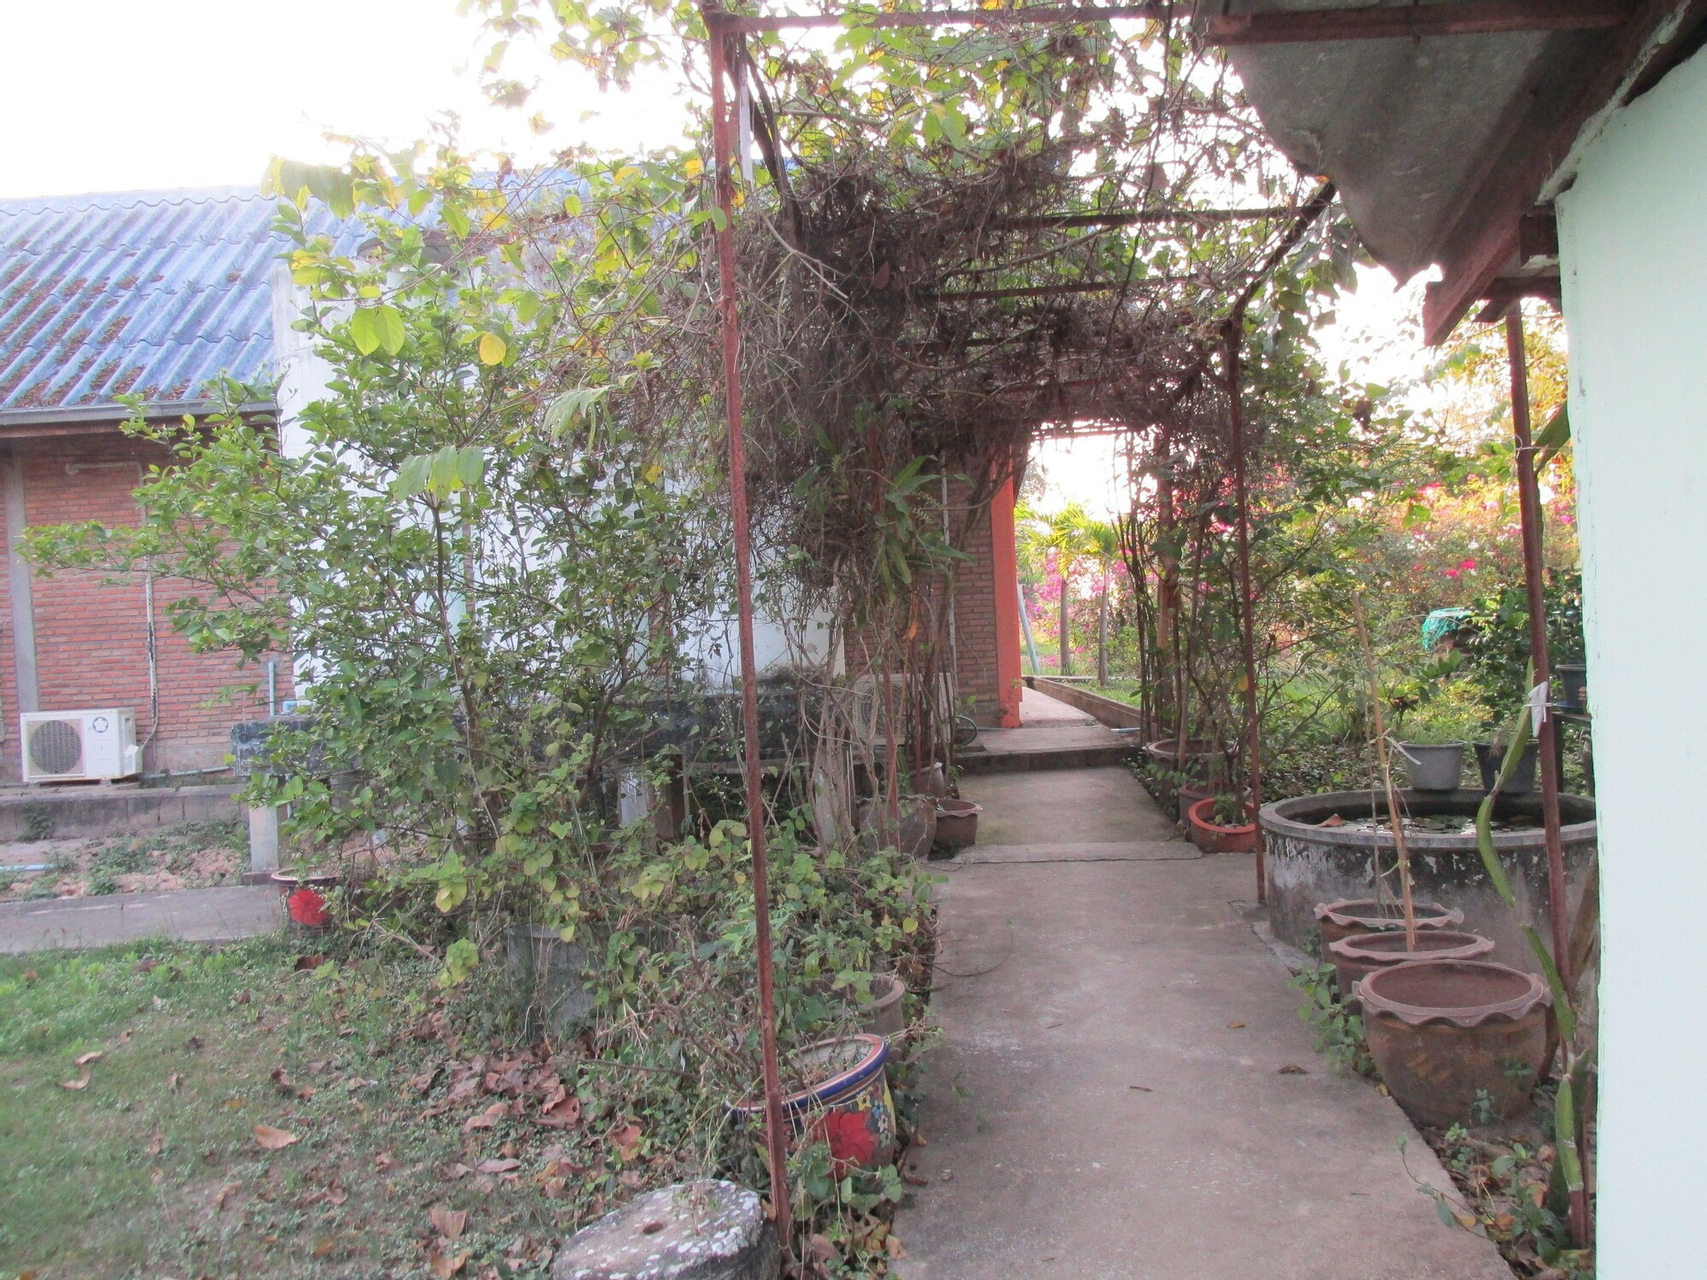 Property grounds 4, Moutain View Guest House, Muang Sukhothai